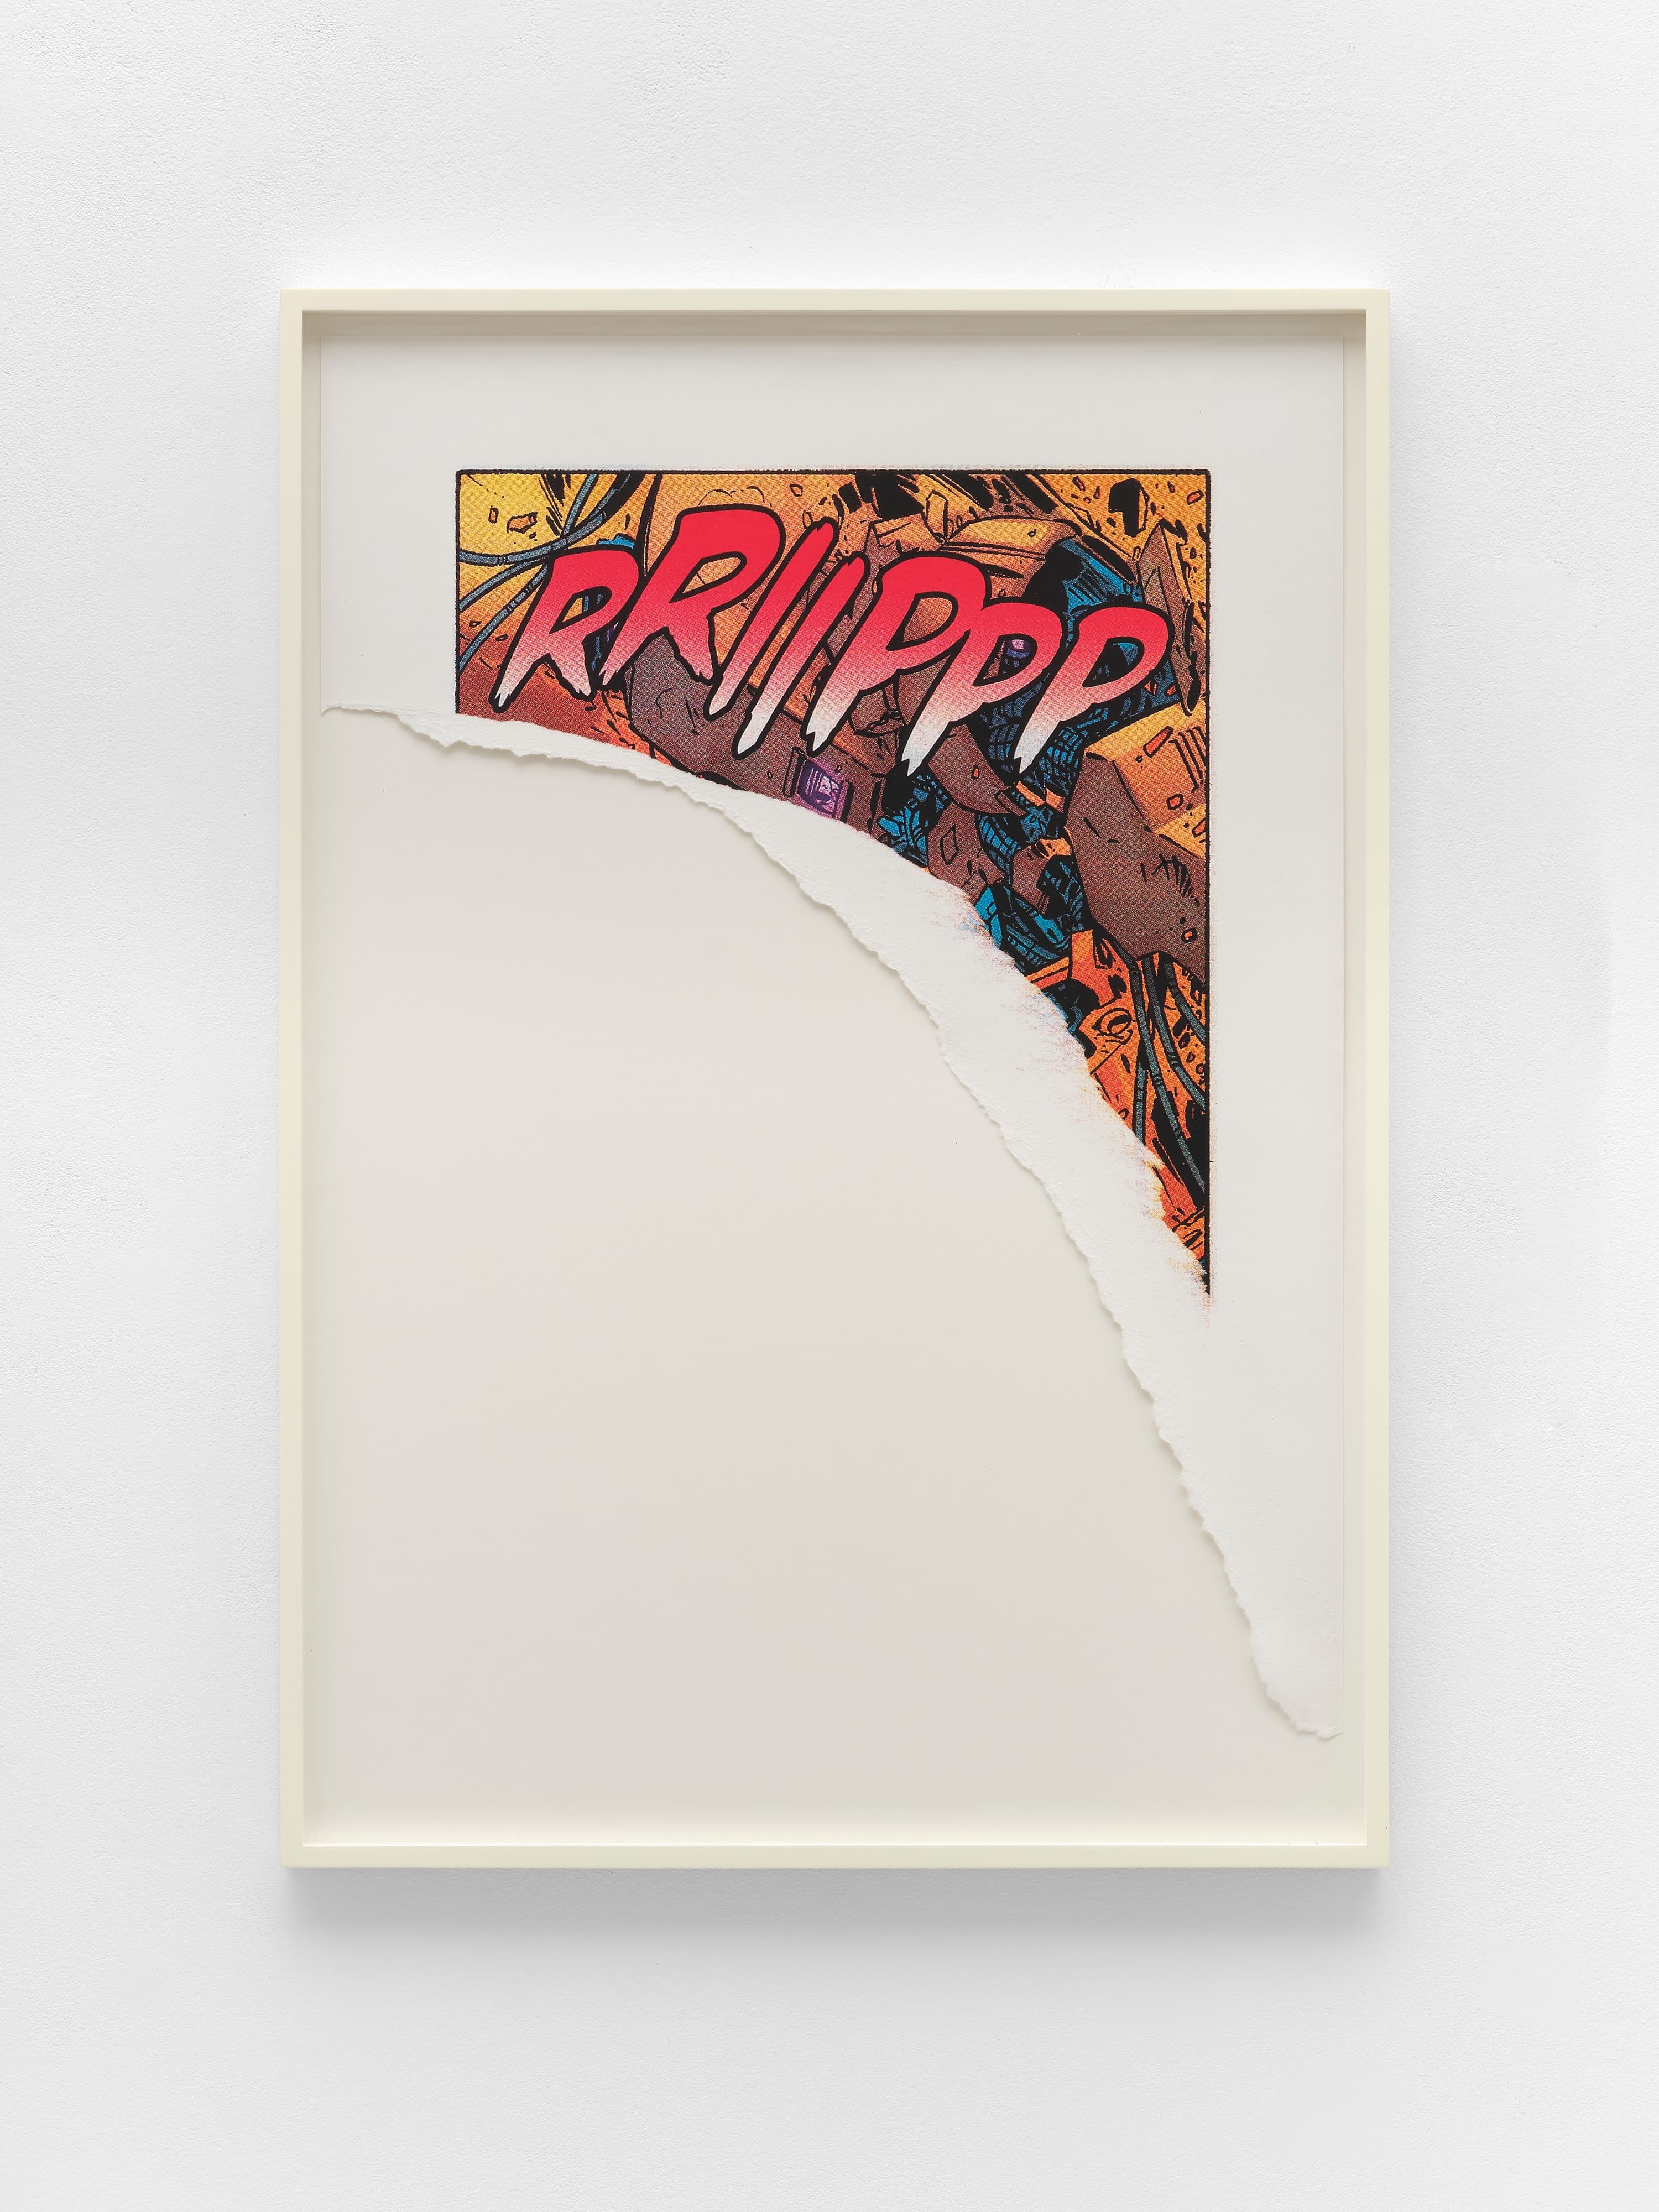 Christian Marclay - Rriippp - 1